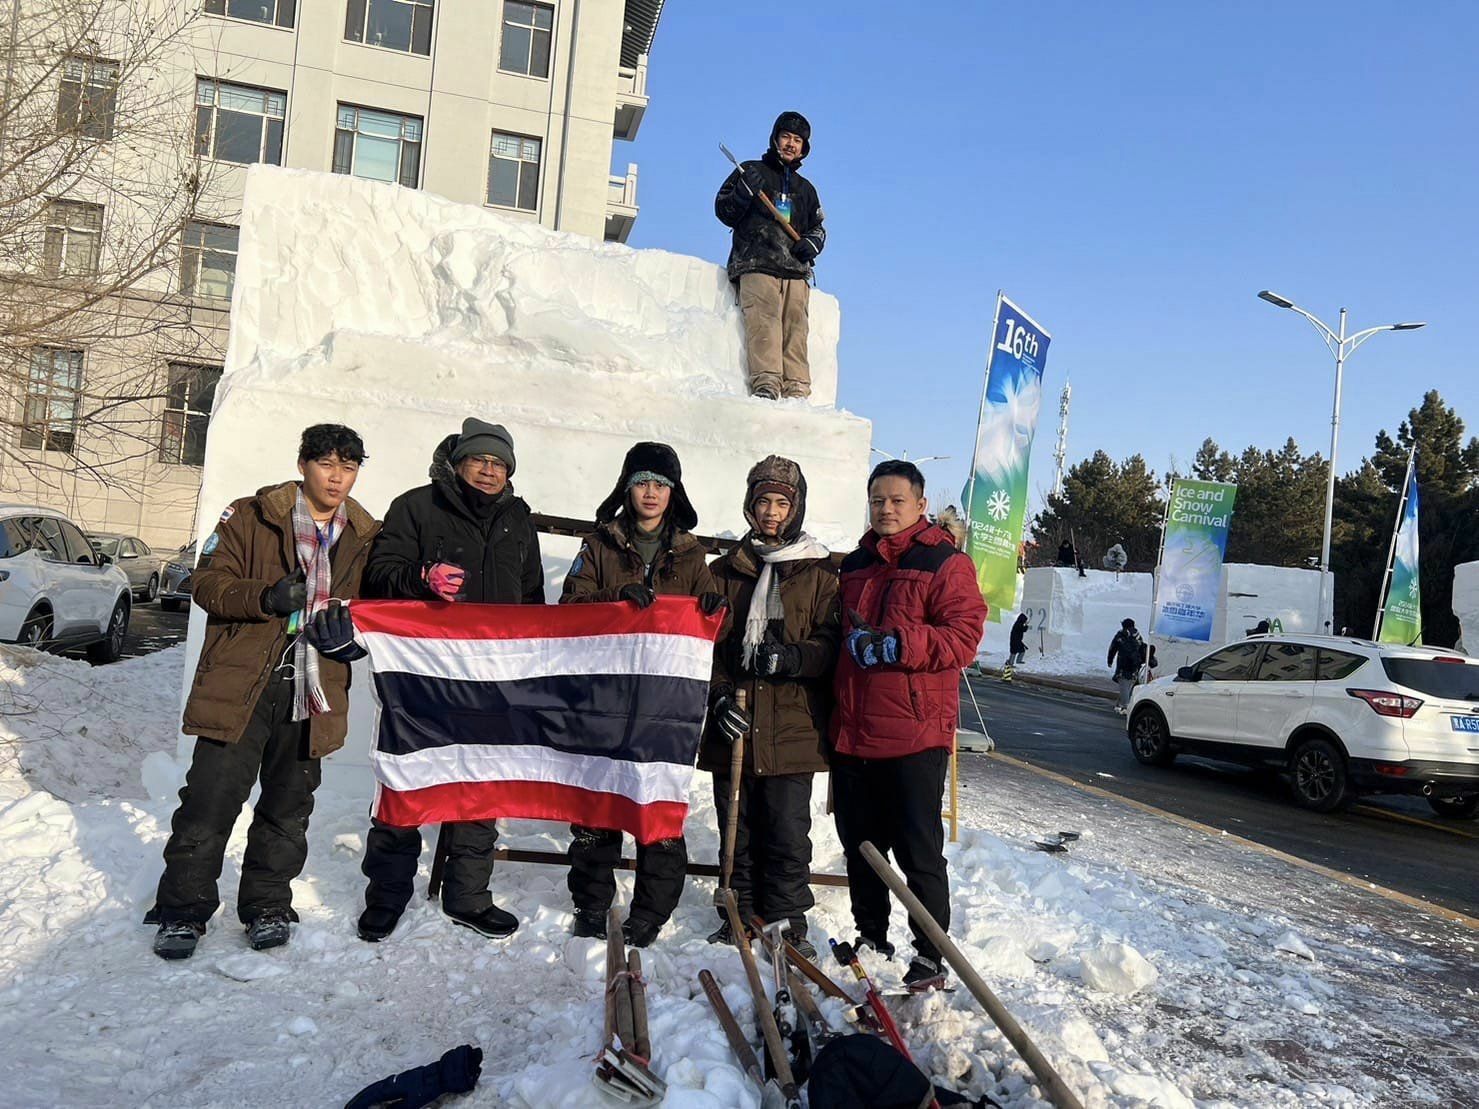 Saowapa Vocational College freezes the competition with top prize in Harbin snow sculpture showdown